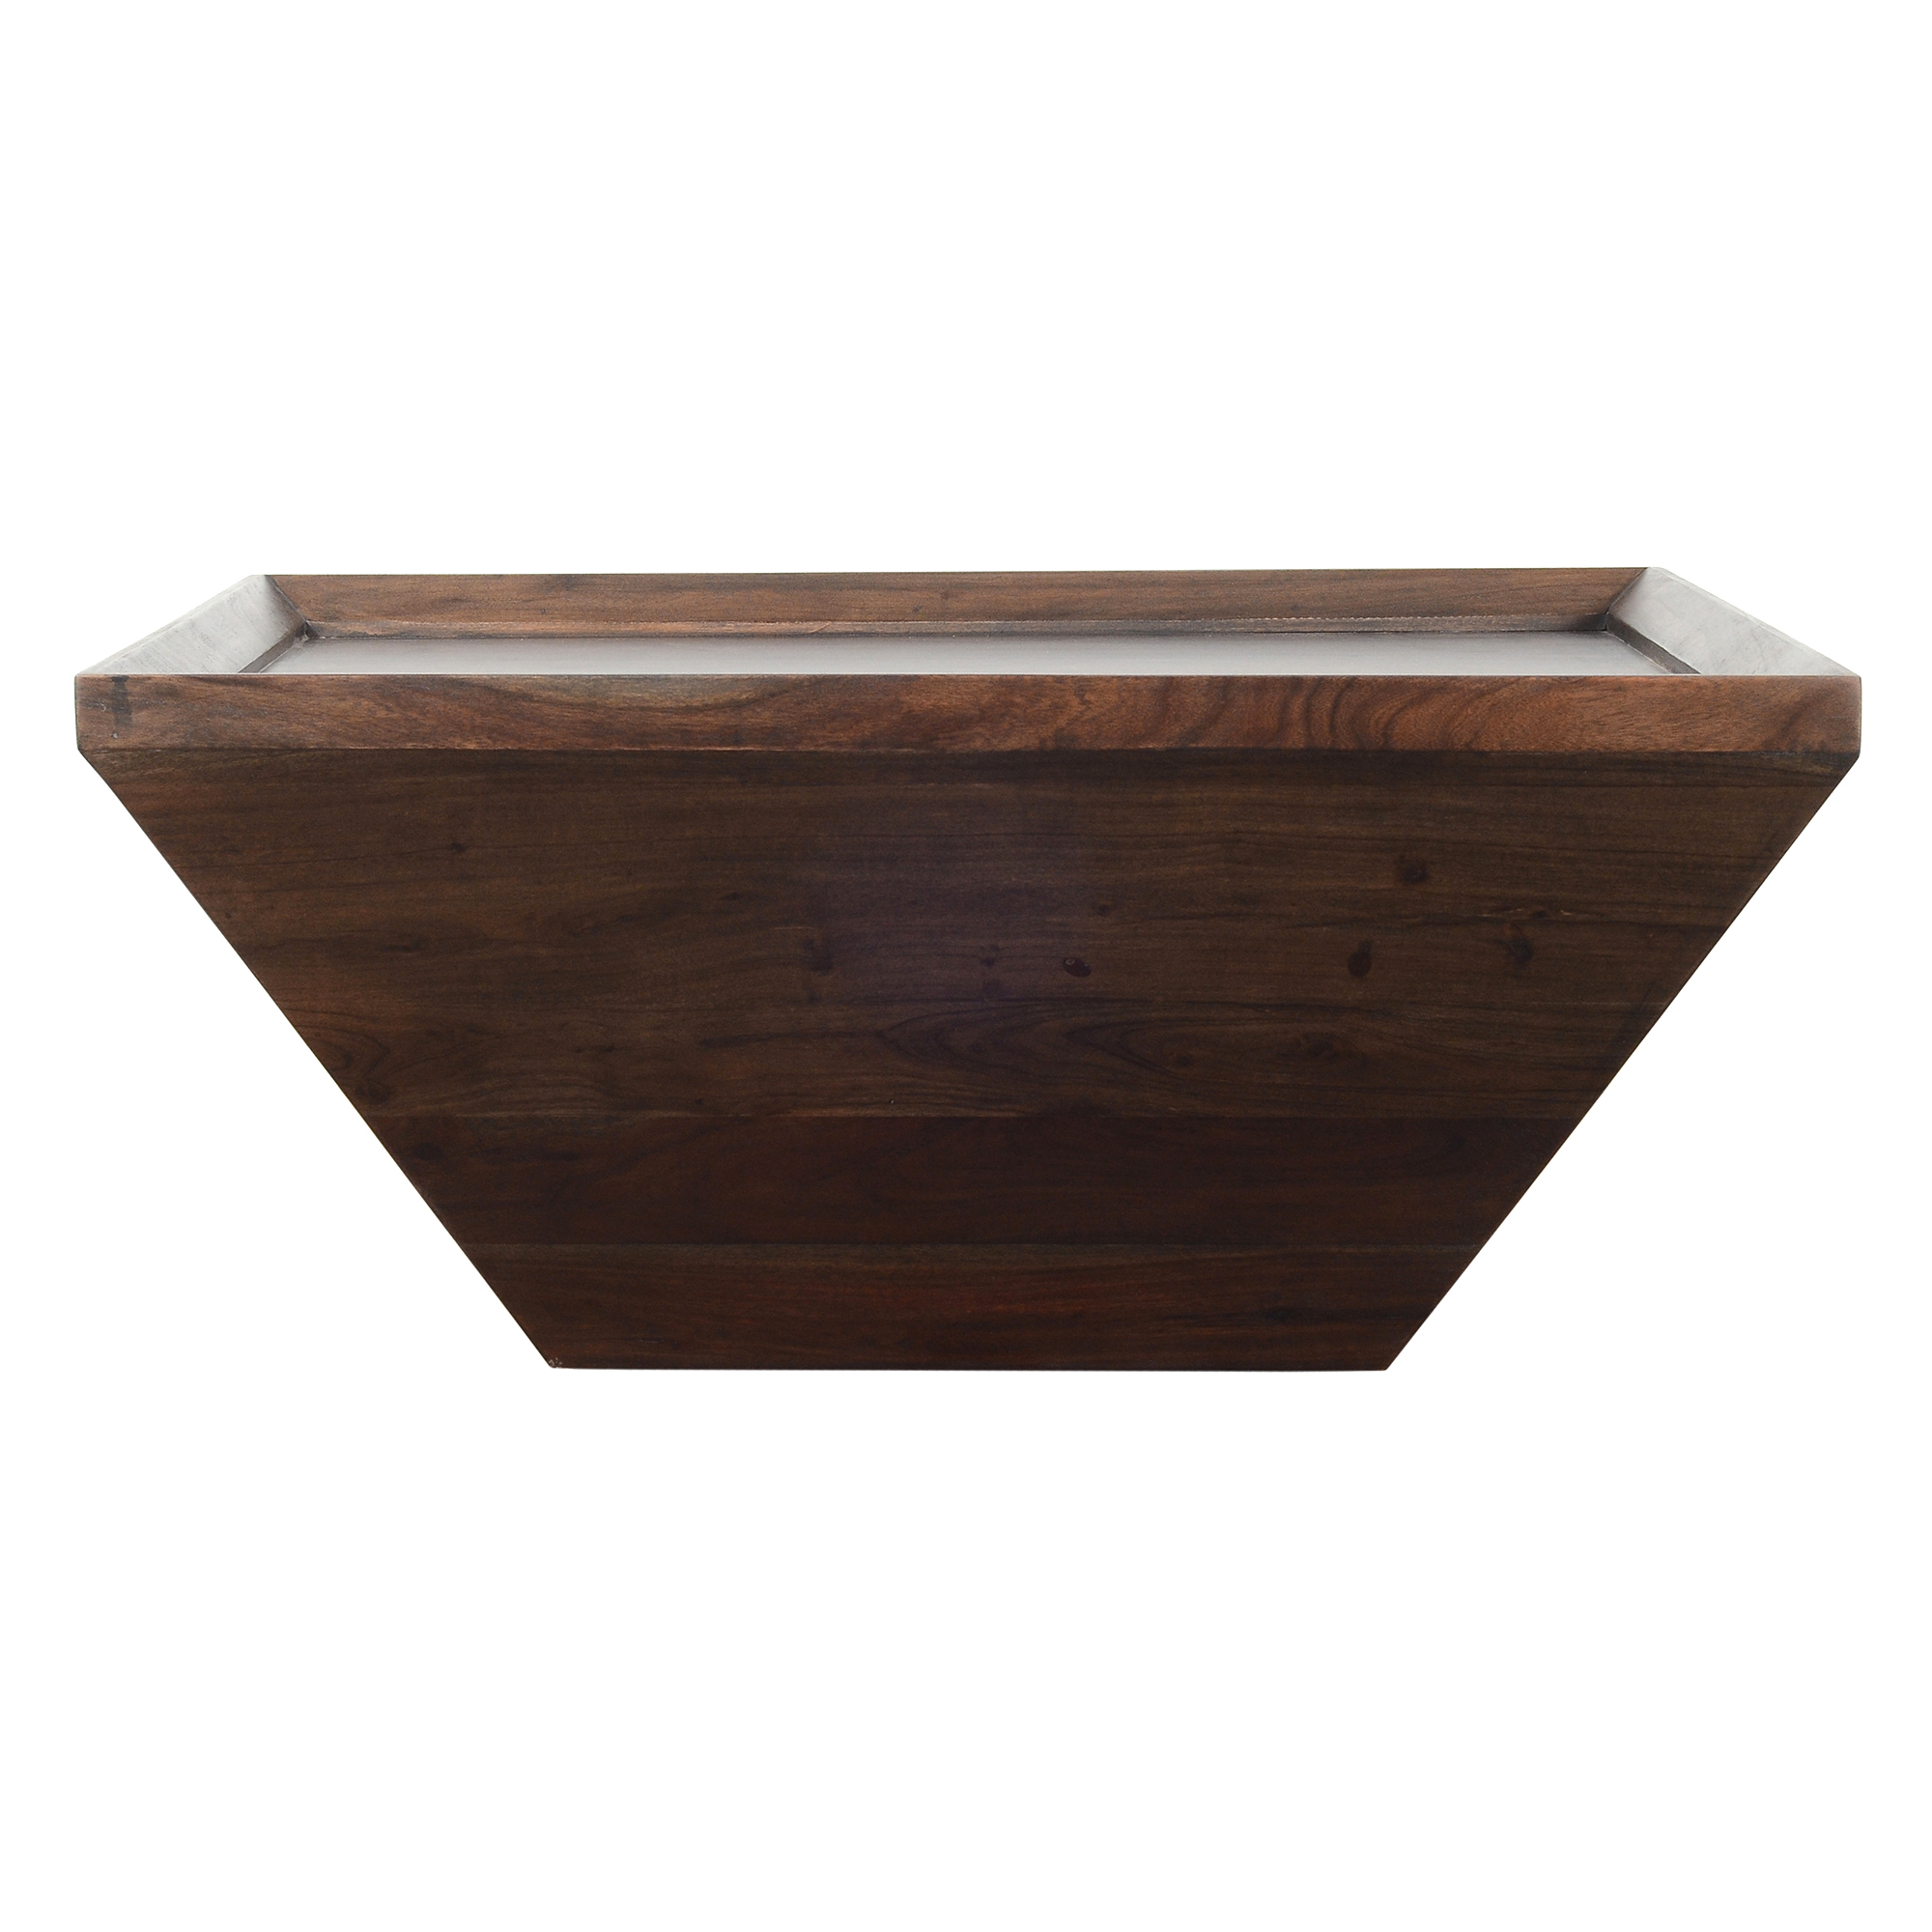 36 Inch Square Shape Acacia Wood Coffee Table With Trapezoid Base, Brown- Saltoro Sherpi